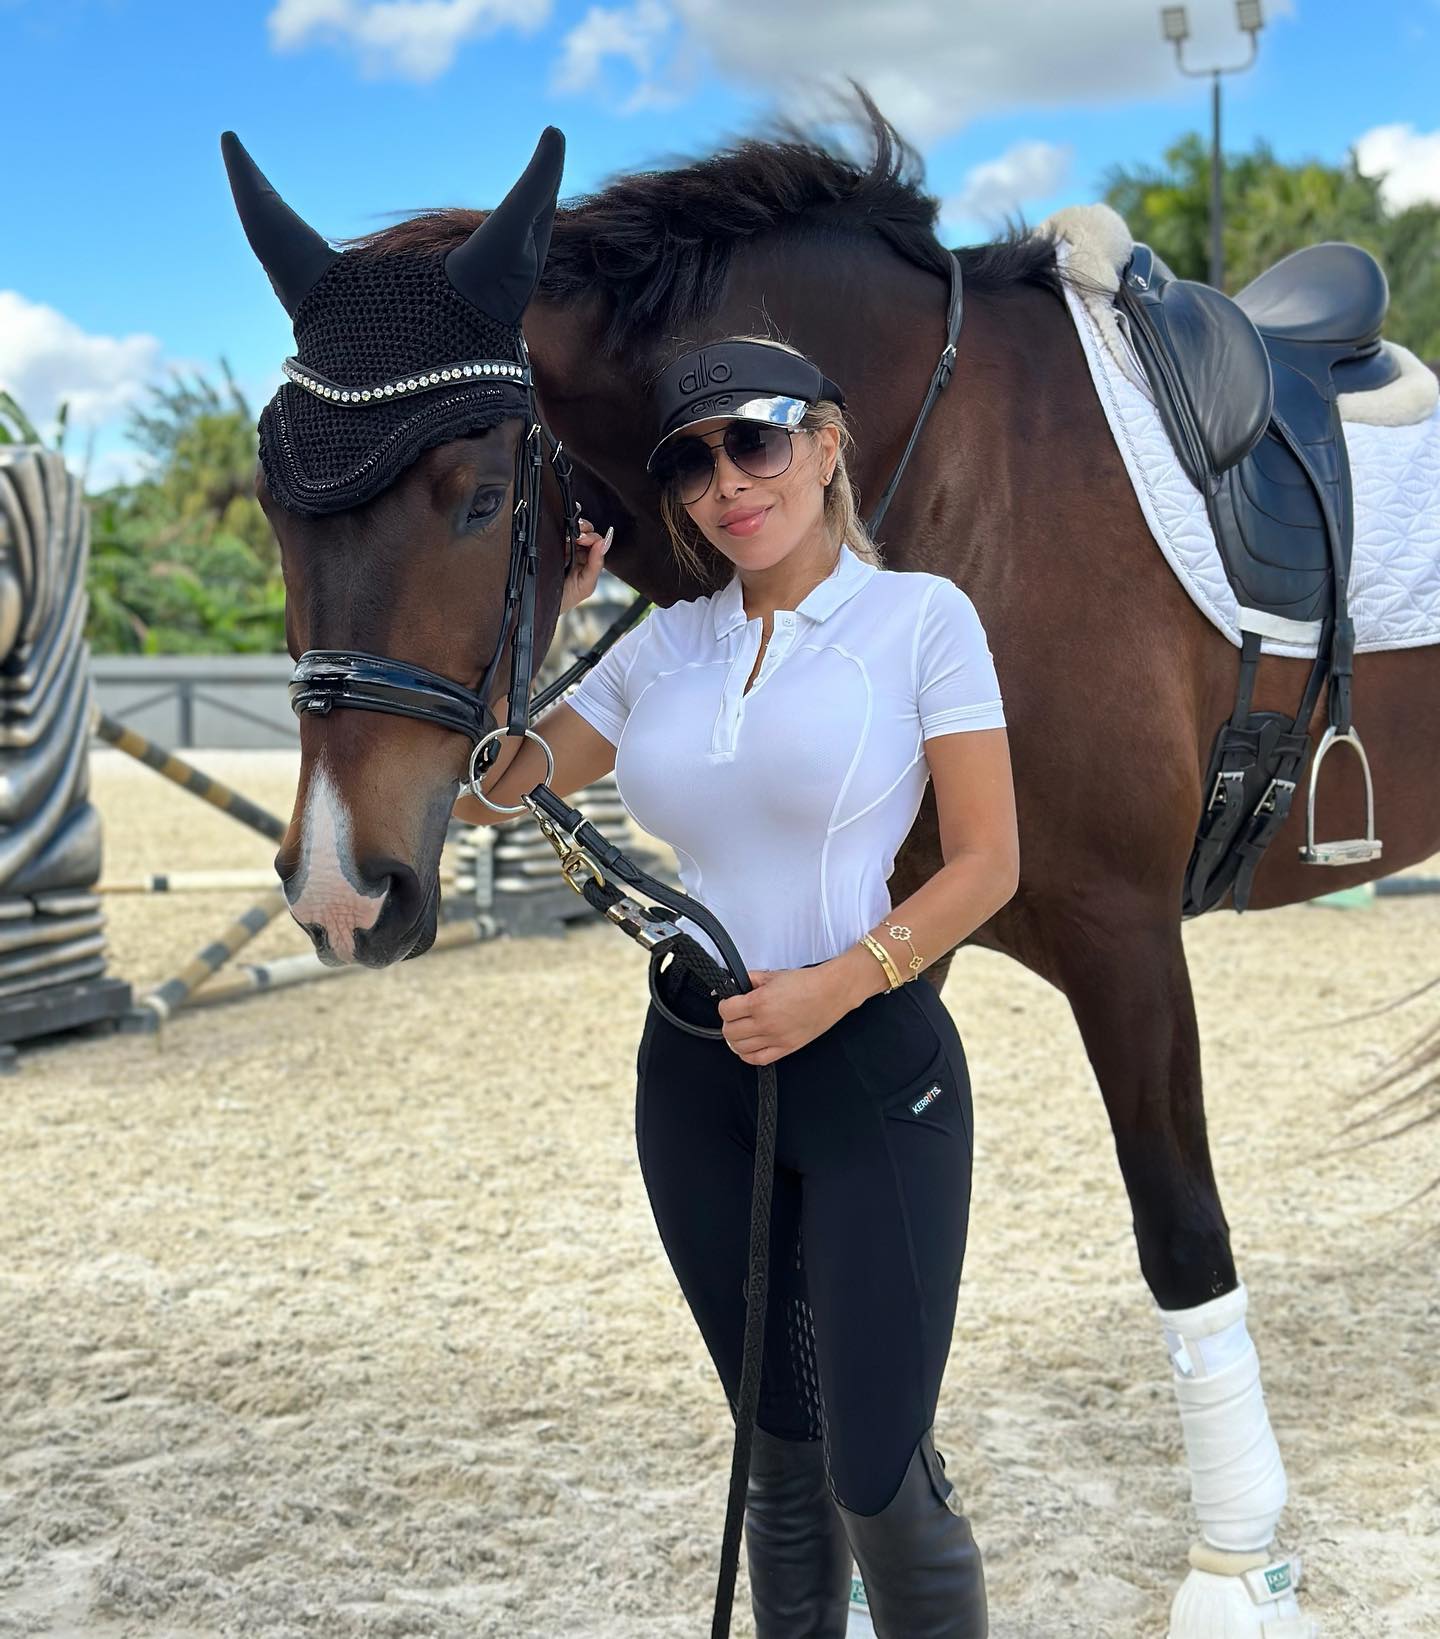 Spending time with this beauty is like being with and angel on earth. 🤍🐎 @nlp.center 
.
.
.
#sergio #love #horse #horseworld #sporthorse #caballos #equestrianlife #lifestyle #bestoftheday #equitation #sport #horsesofinstagram #showjumping #class